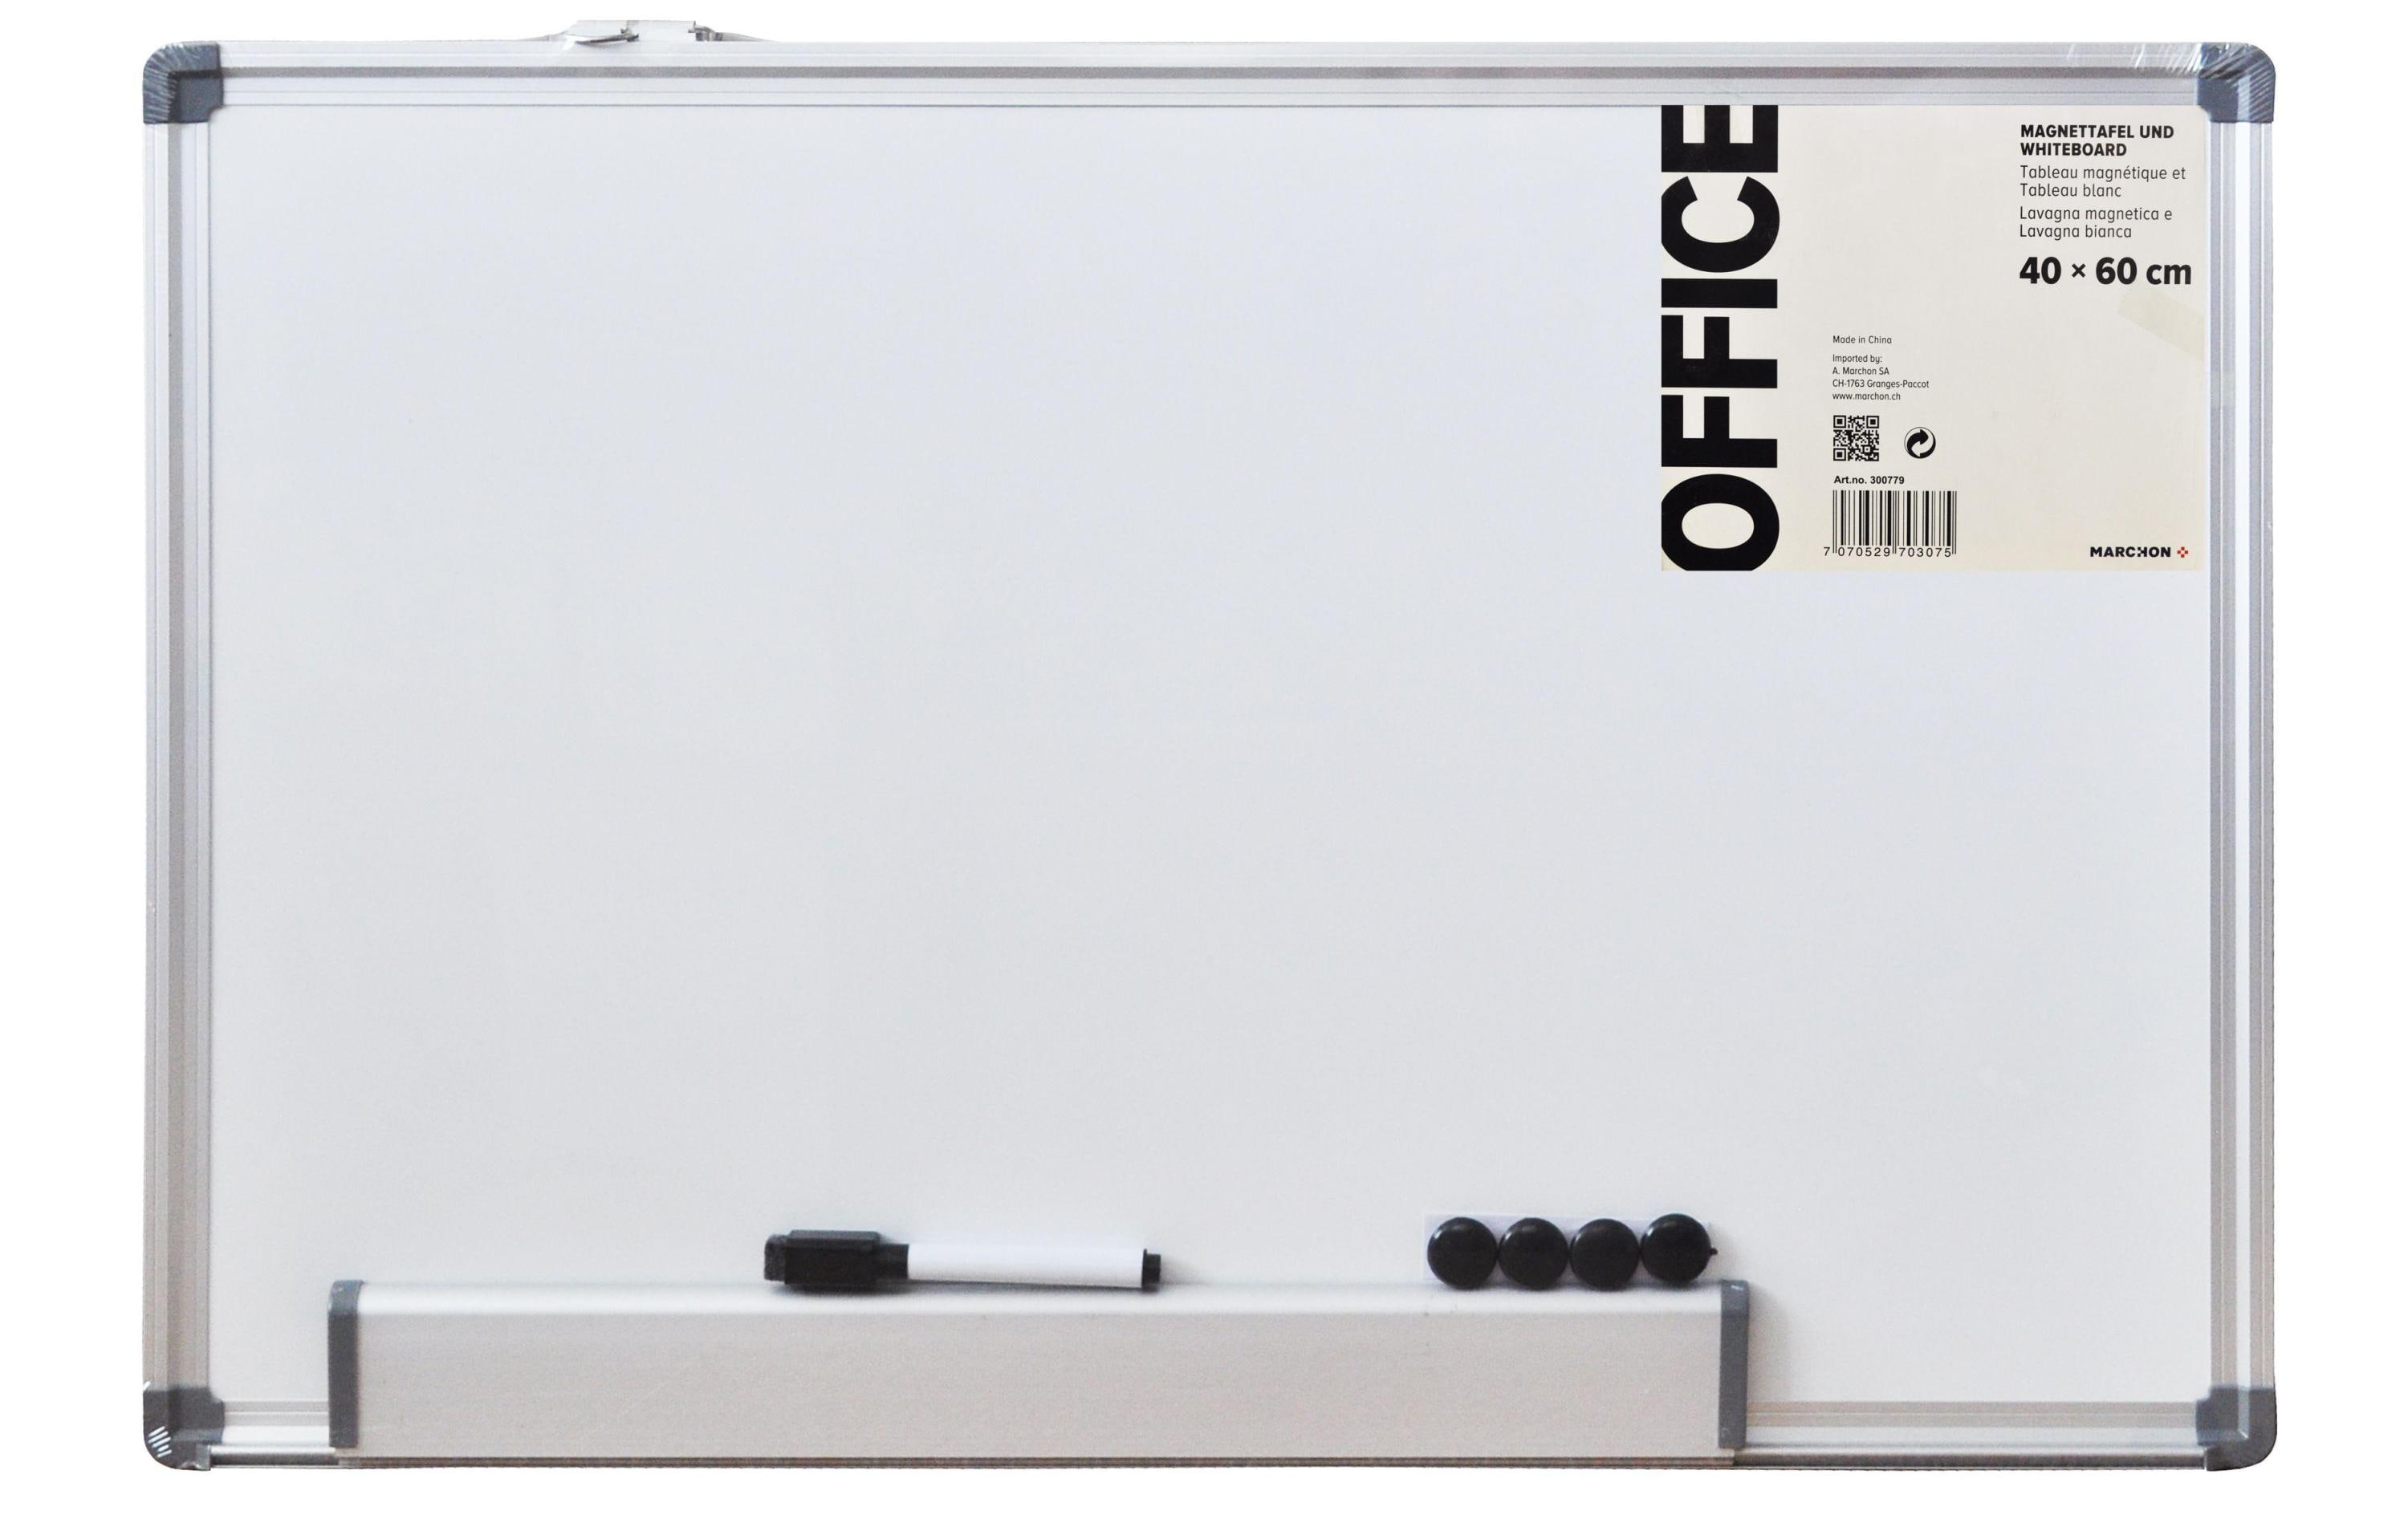 Office Magnethaftendes Whiteboard 40 cm x 60 cm, Weiss